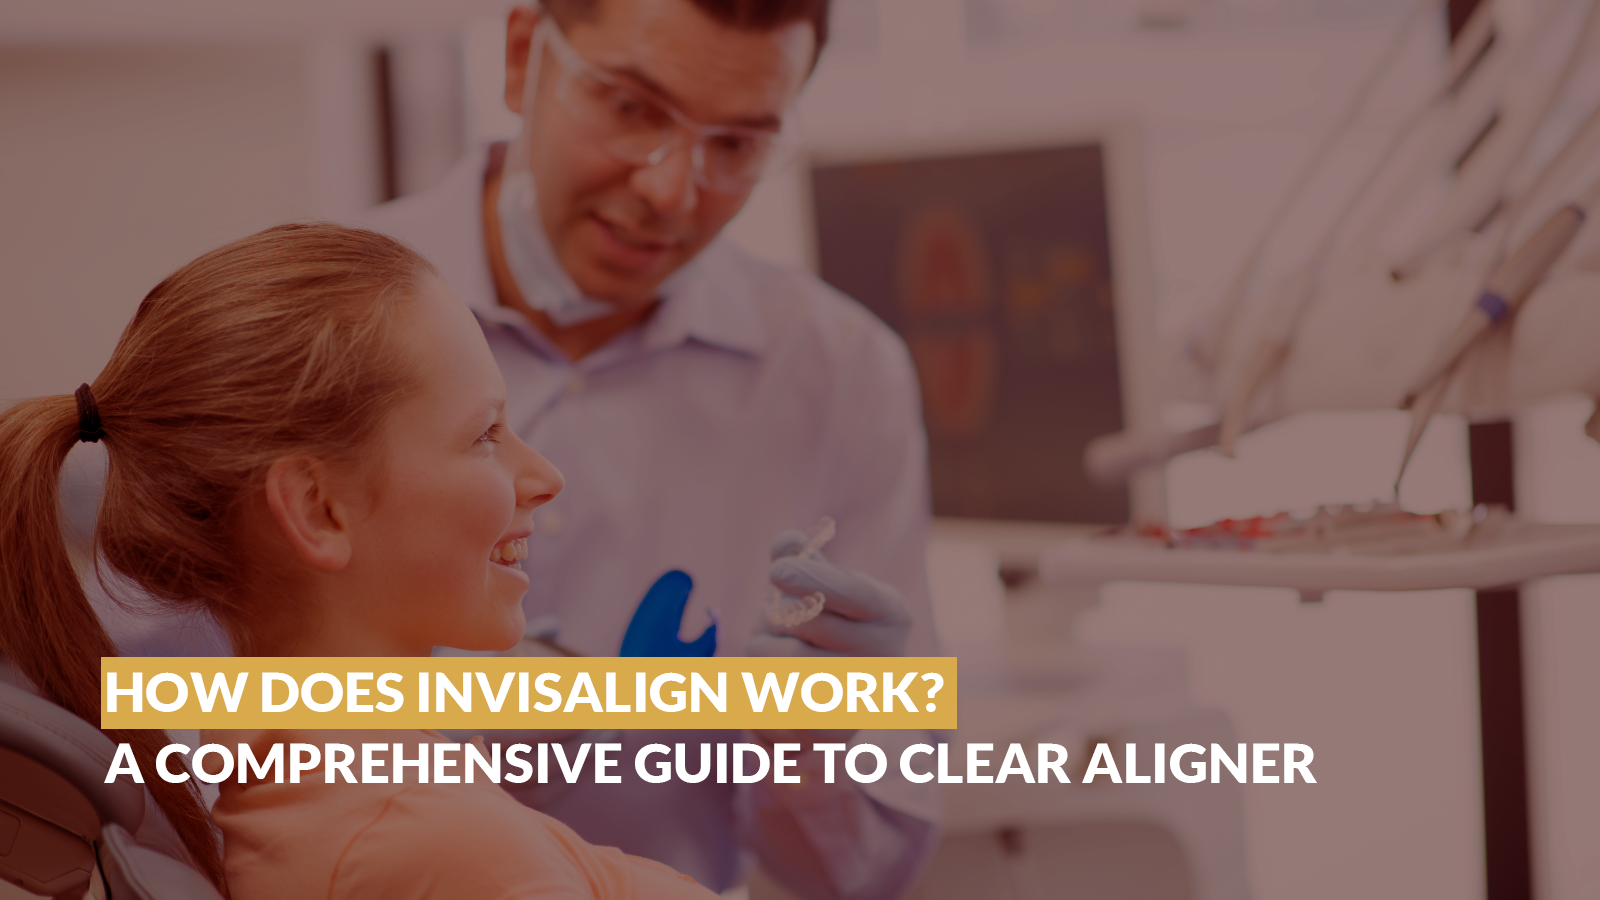 How Does Invisalign Work? A Comprehensive Guide to Clear Aligner